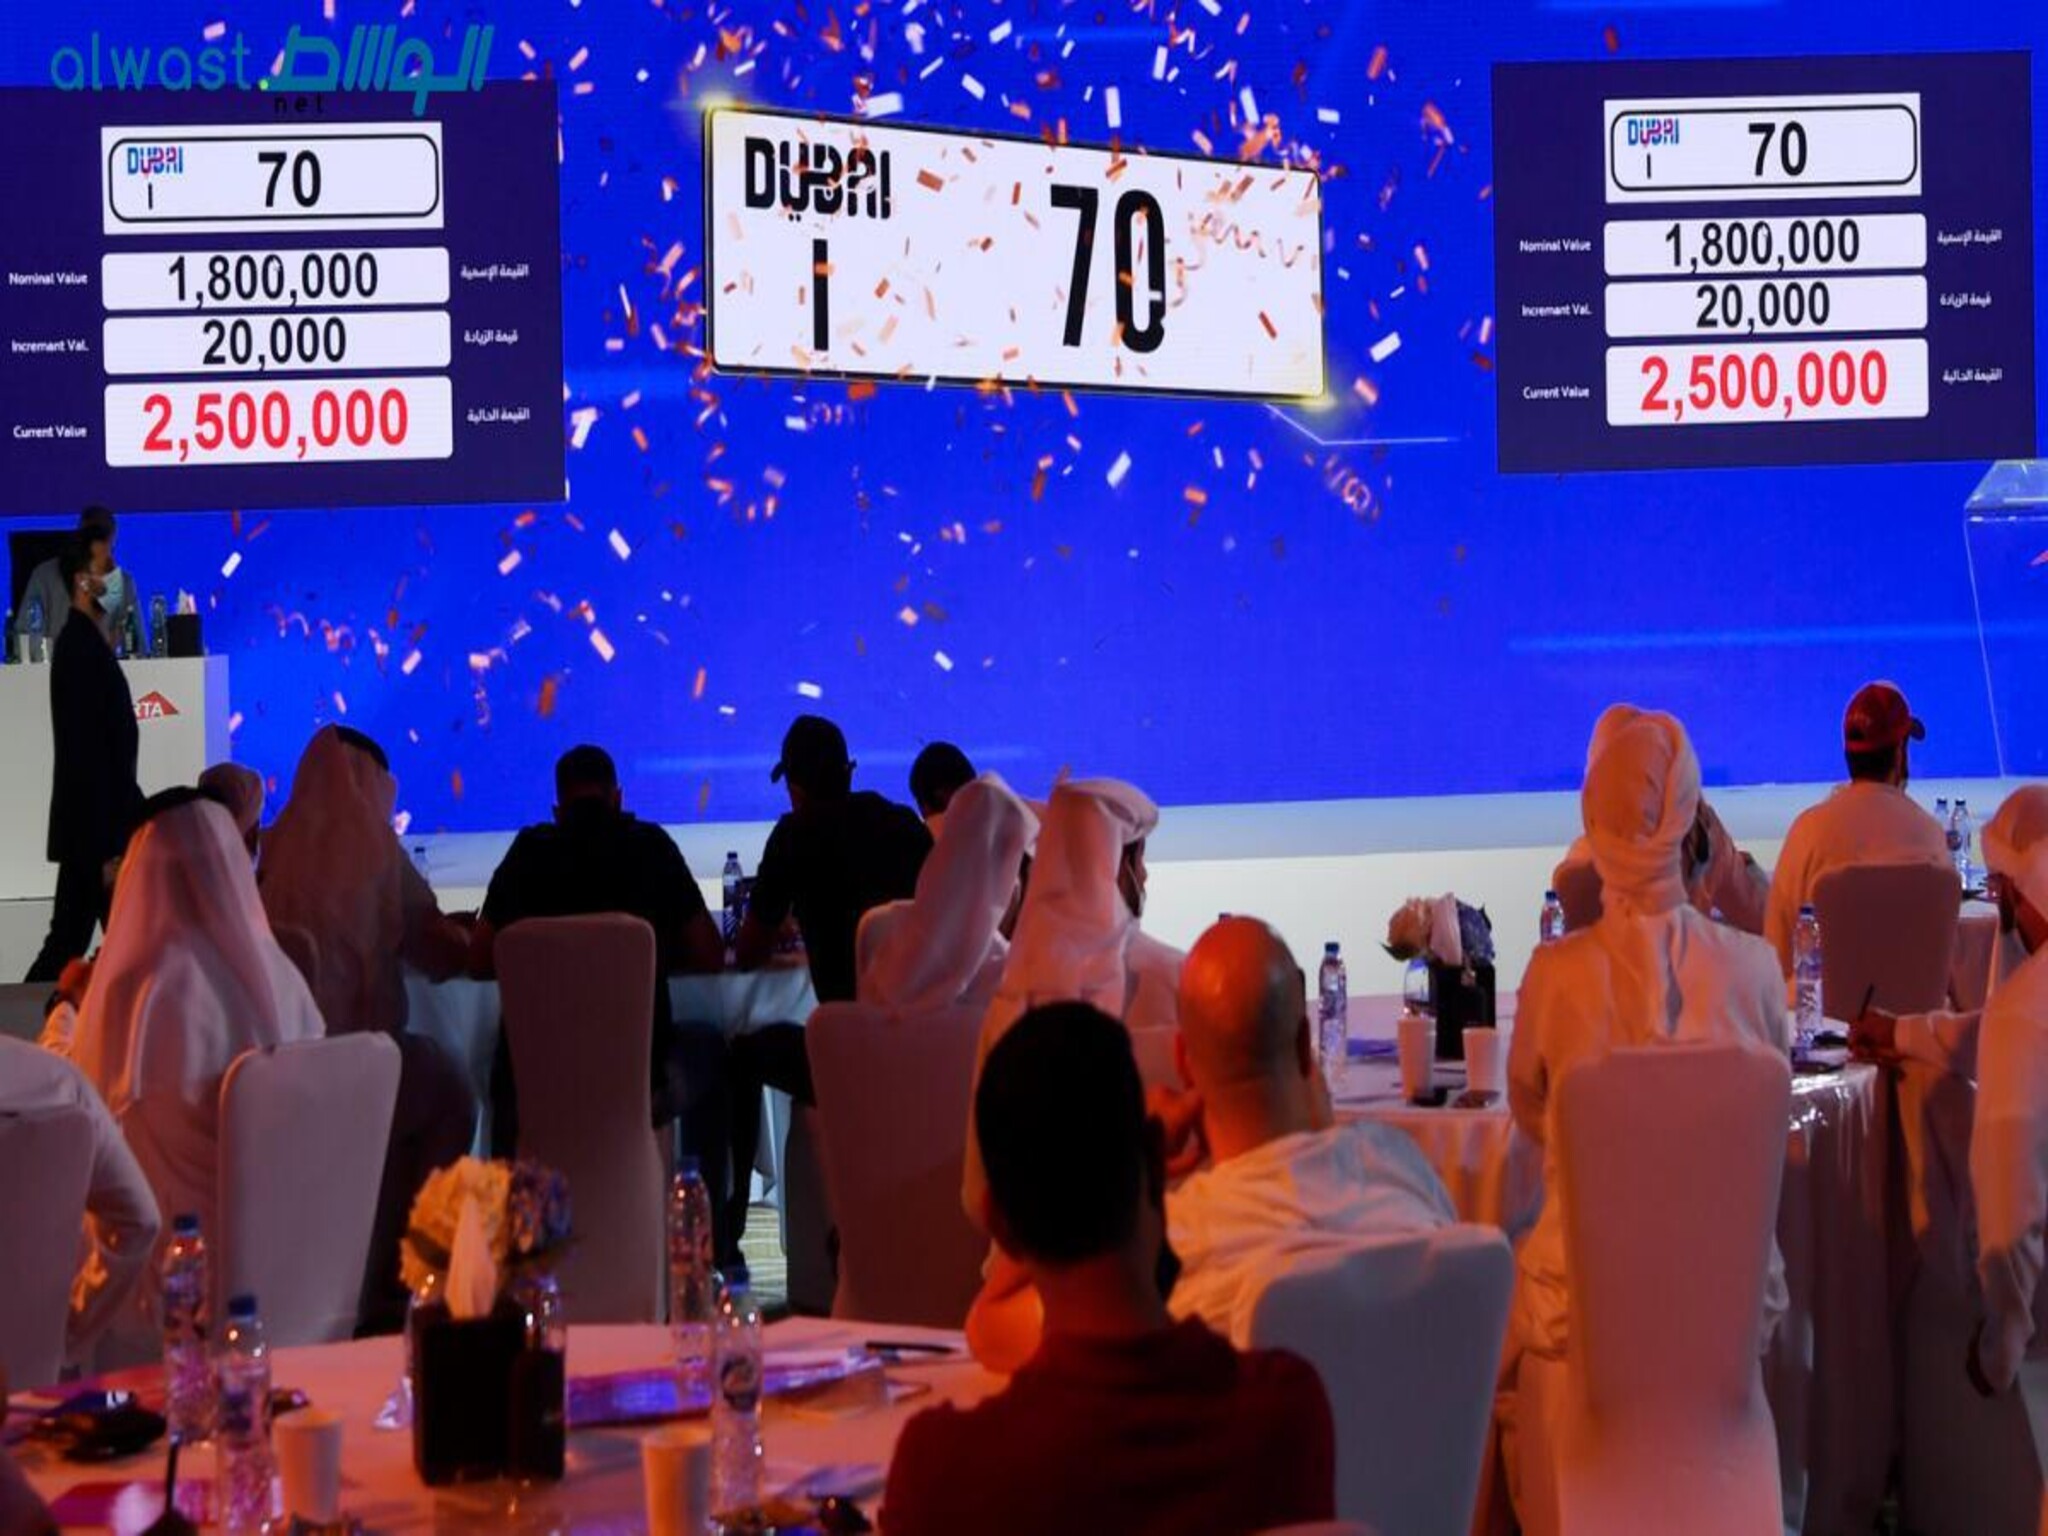 Dubai RTA Plans Auction for 90 Exclusive License Plates on December 30th